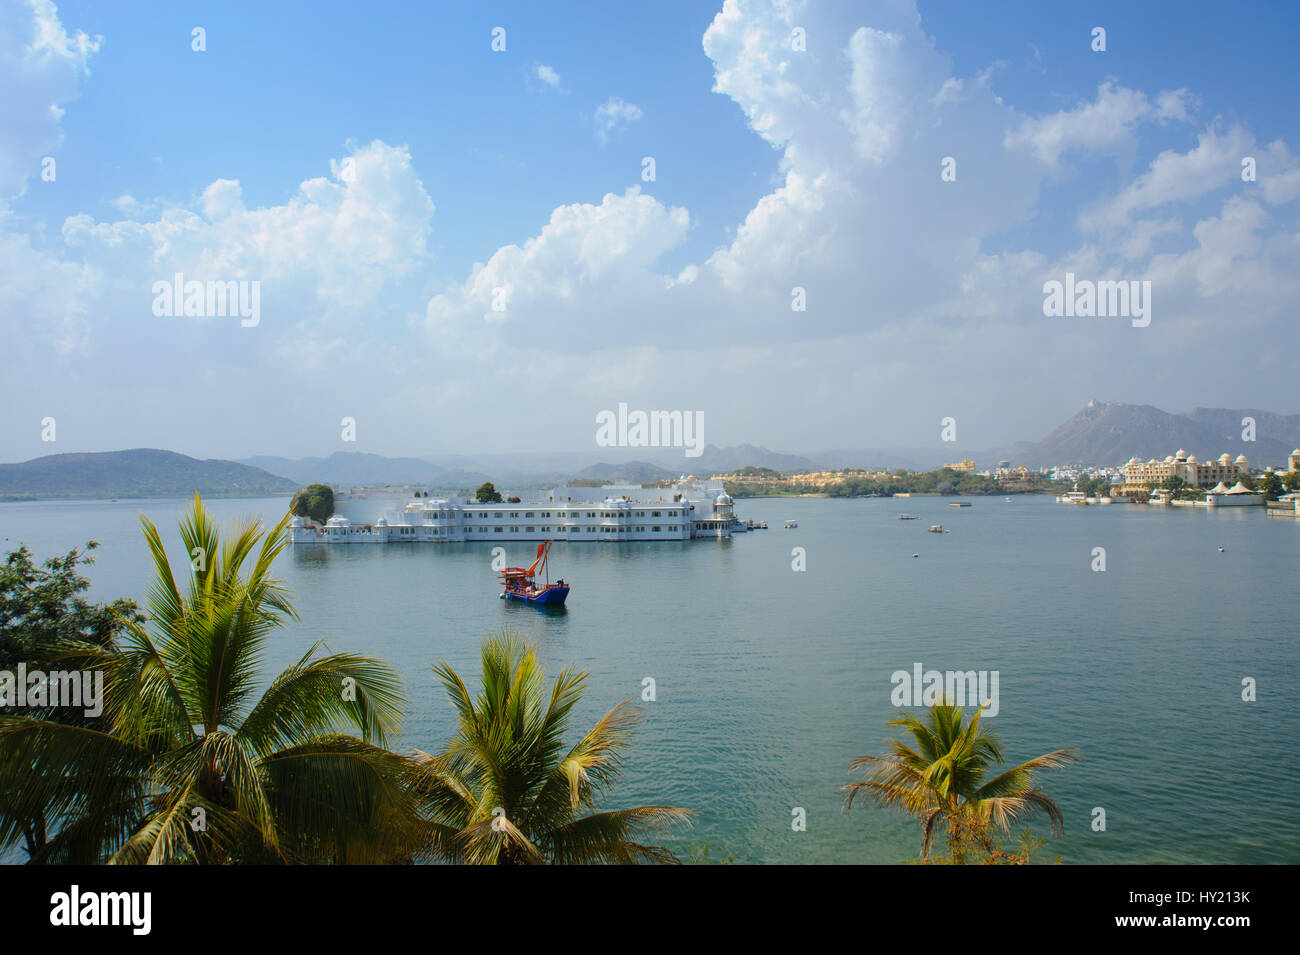 View across Lake Pichola to Lake Palace from City Palace, Udaipur Stock Photo